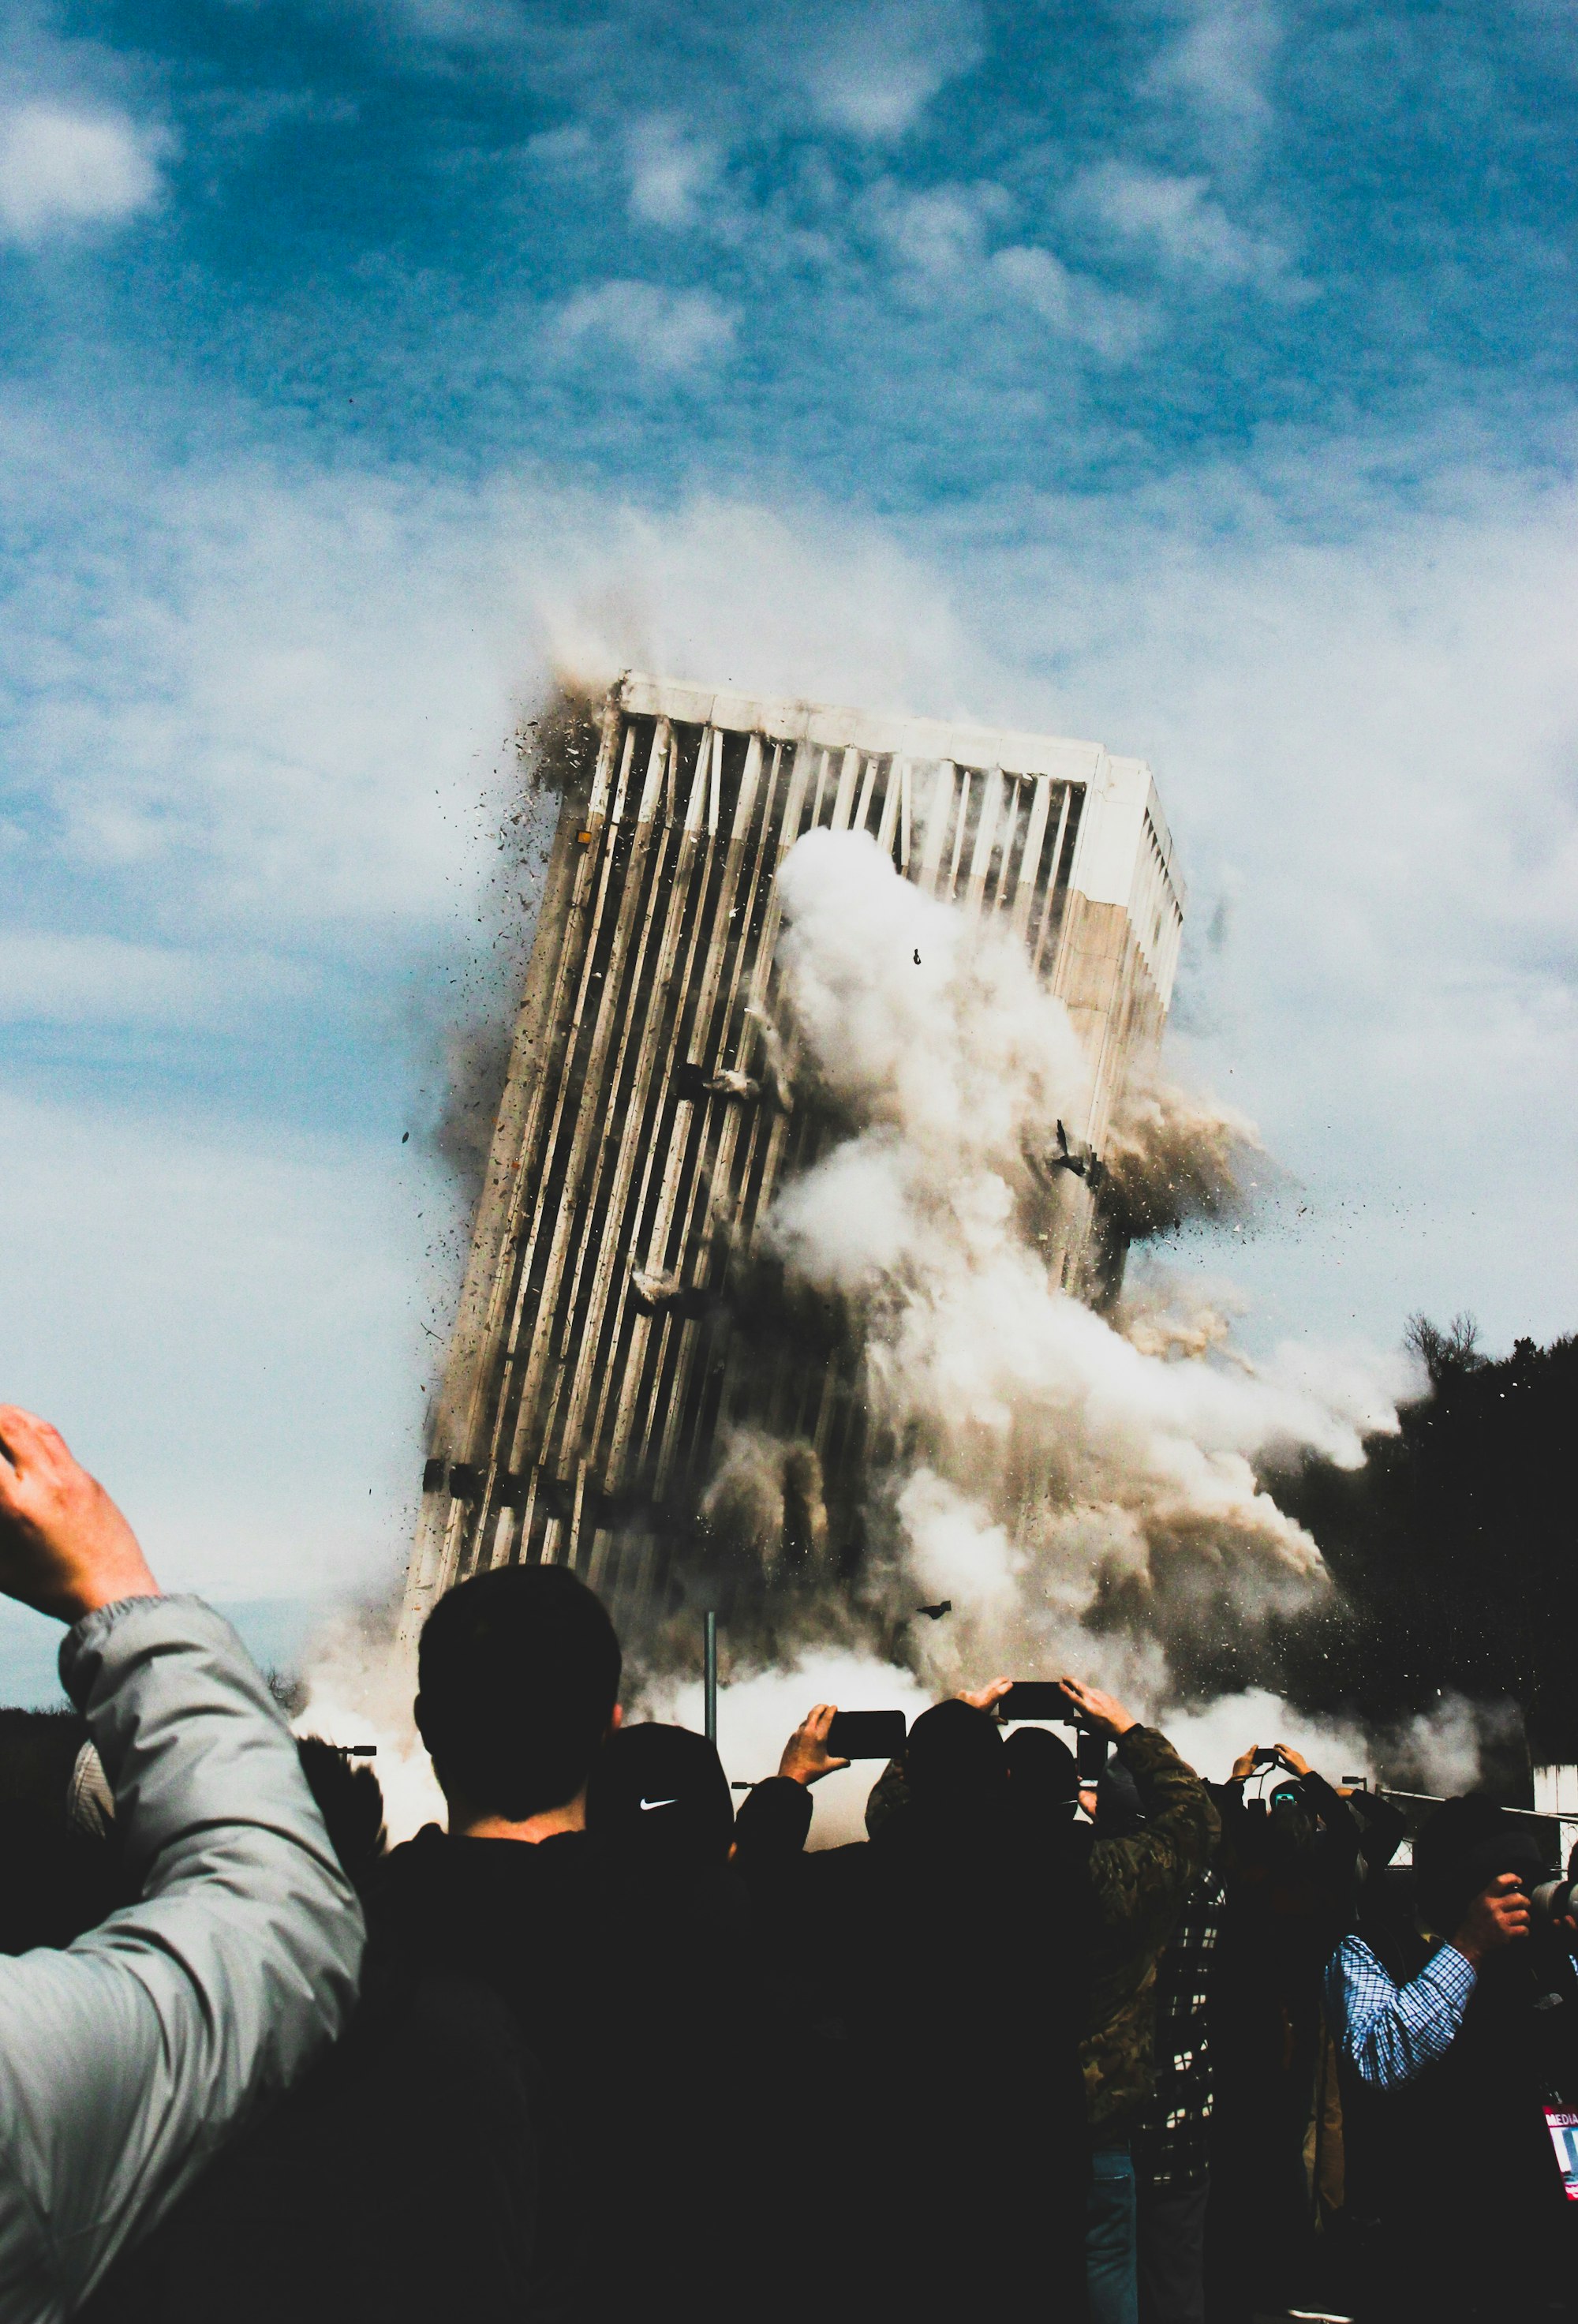 A group of people watch and record a building being imploded.